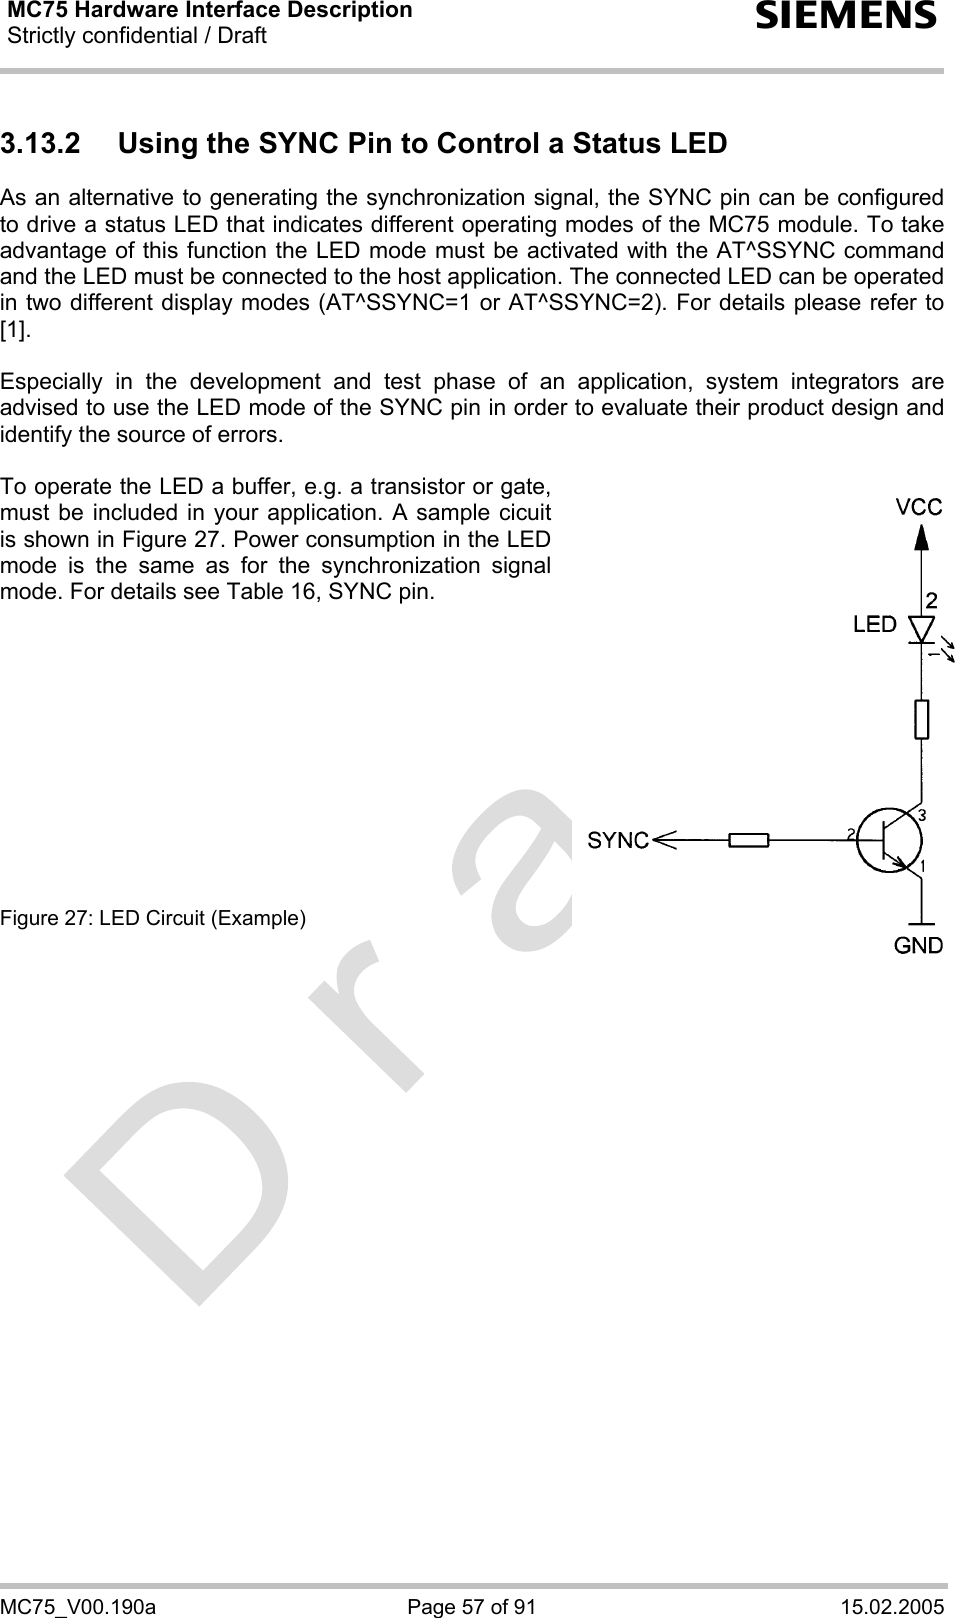 MC75 Hardware Interface Description Strictly confidential / Draft  s MC75_V00.190a  Page 57 of 91  15.02.2005 3.13.2  Using the SYNC Pin to Control a Status LED  As an alternative to generating the synchronization signal, the SYNC pin can be configured to drive a status LED that indicates different operating modes of the MC75 module. To take advantage of this function the LED mode must be activated with the AT^SSYNC command and the LED must be connected to the host application. The connected LED can be operated in two different display modes (AT^SSYNC=1 or AT^SSYNC=2). For details please refer to [1].  Especially in the development and test phase of an application, system integrators are advised to use the LED mode of the SYNC pin in order to evaluate their product design and identify the source of errors.  To operate the LED a buffer, e.g. a transistor or gate, must be included in your application. A sample cicuit is shown in Figure 27. Power consumption in the LED mode is the same as for the synchronization signal mode. For details see Table 16, SYNC pin.            Figure 27: LED Circuit (Example)  